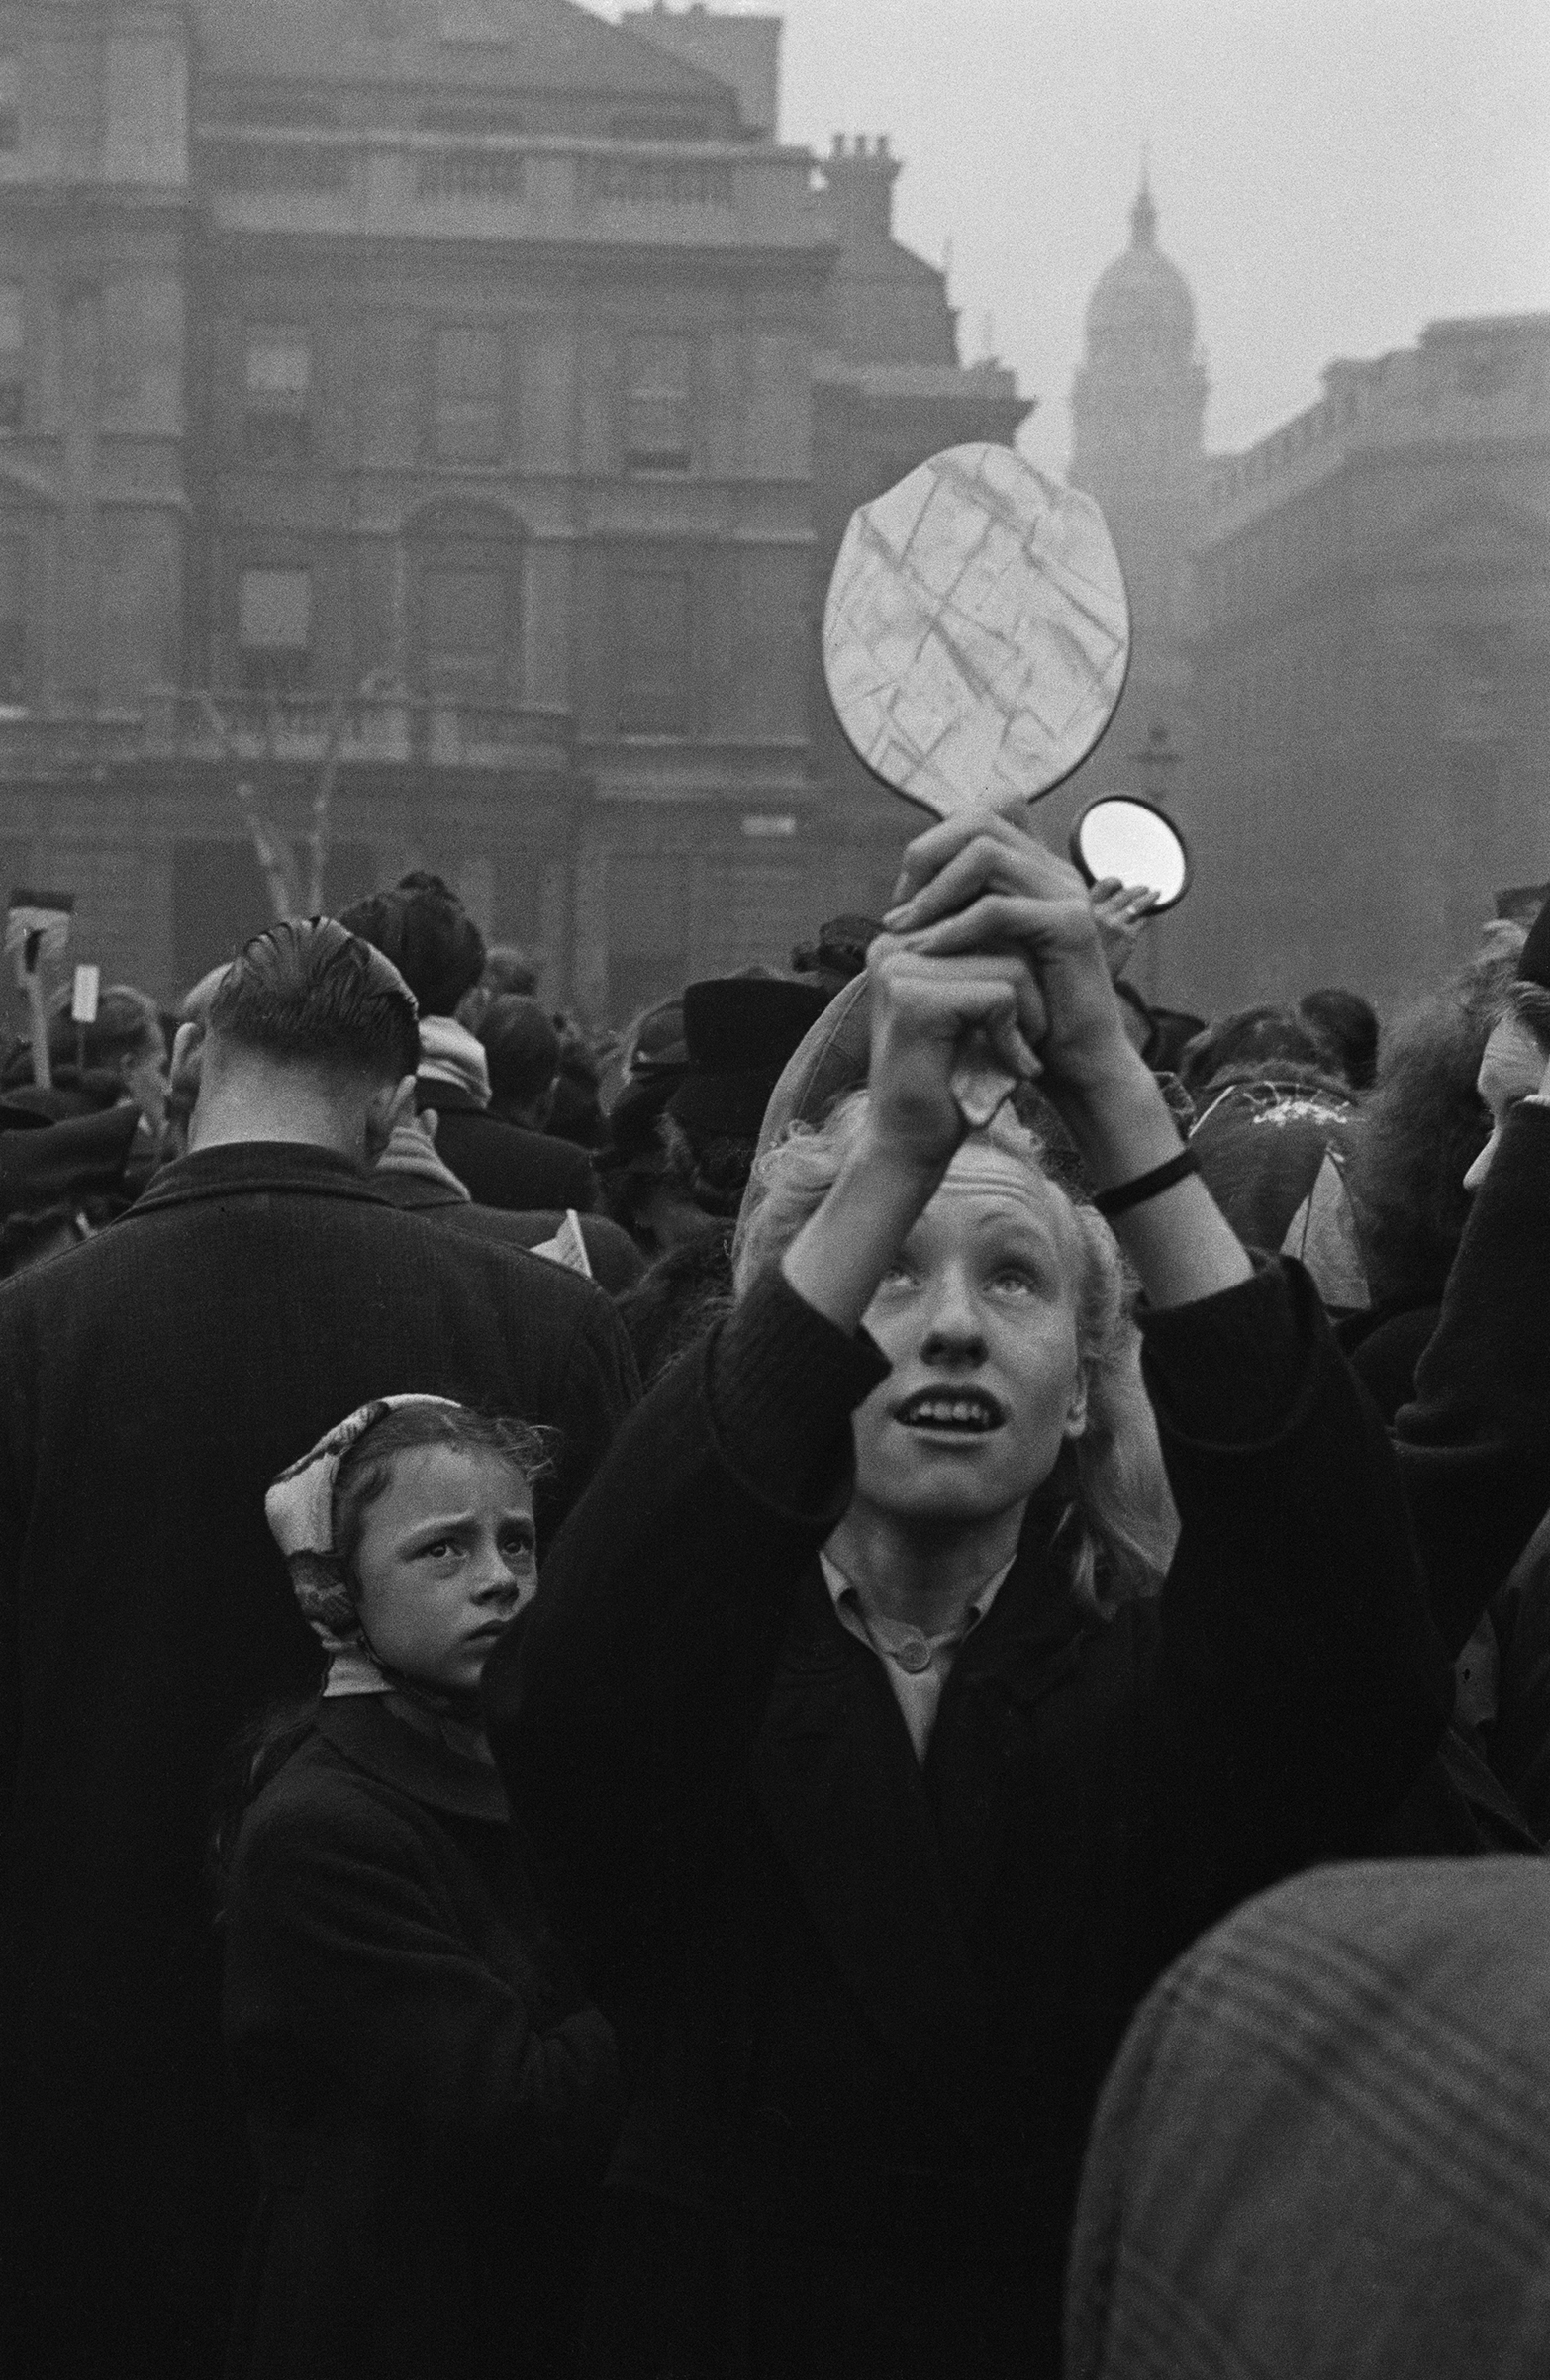 A spectator uses a hand-held mirror to see over the crowd during the wedding of Queen Elizabeth II and Prince Philip, Duke of Edinburgh, Nov. 20, 1947.